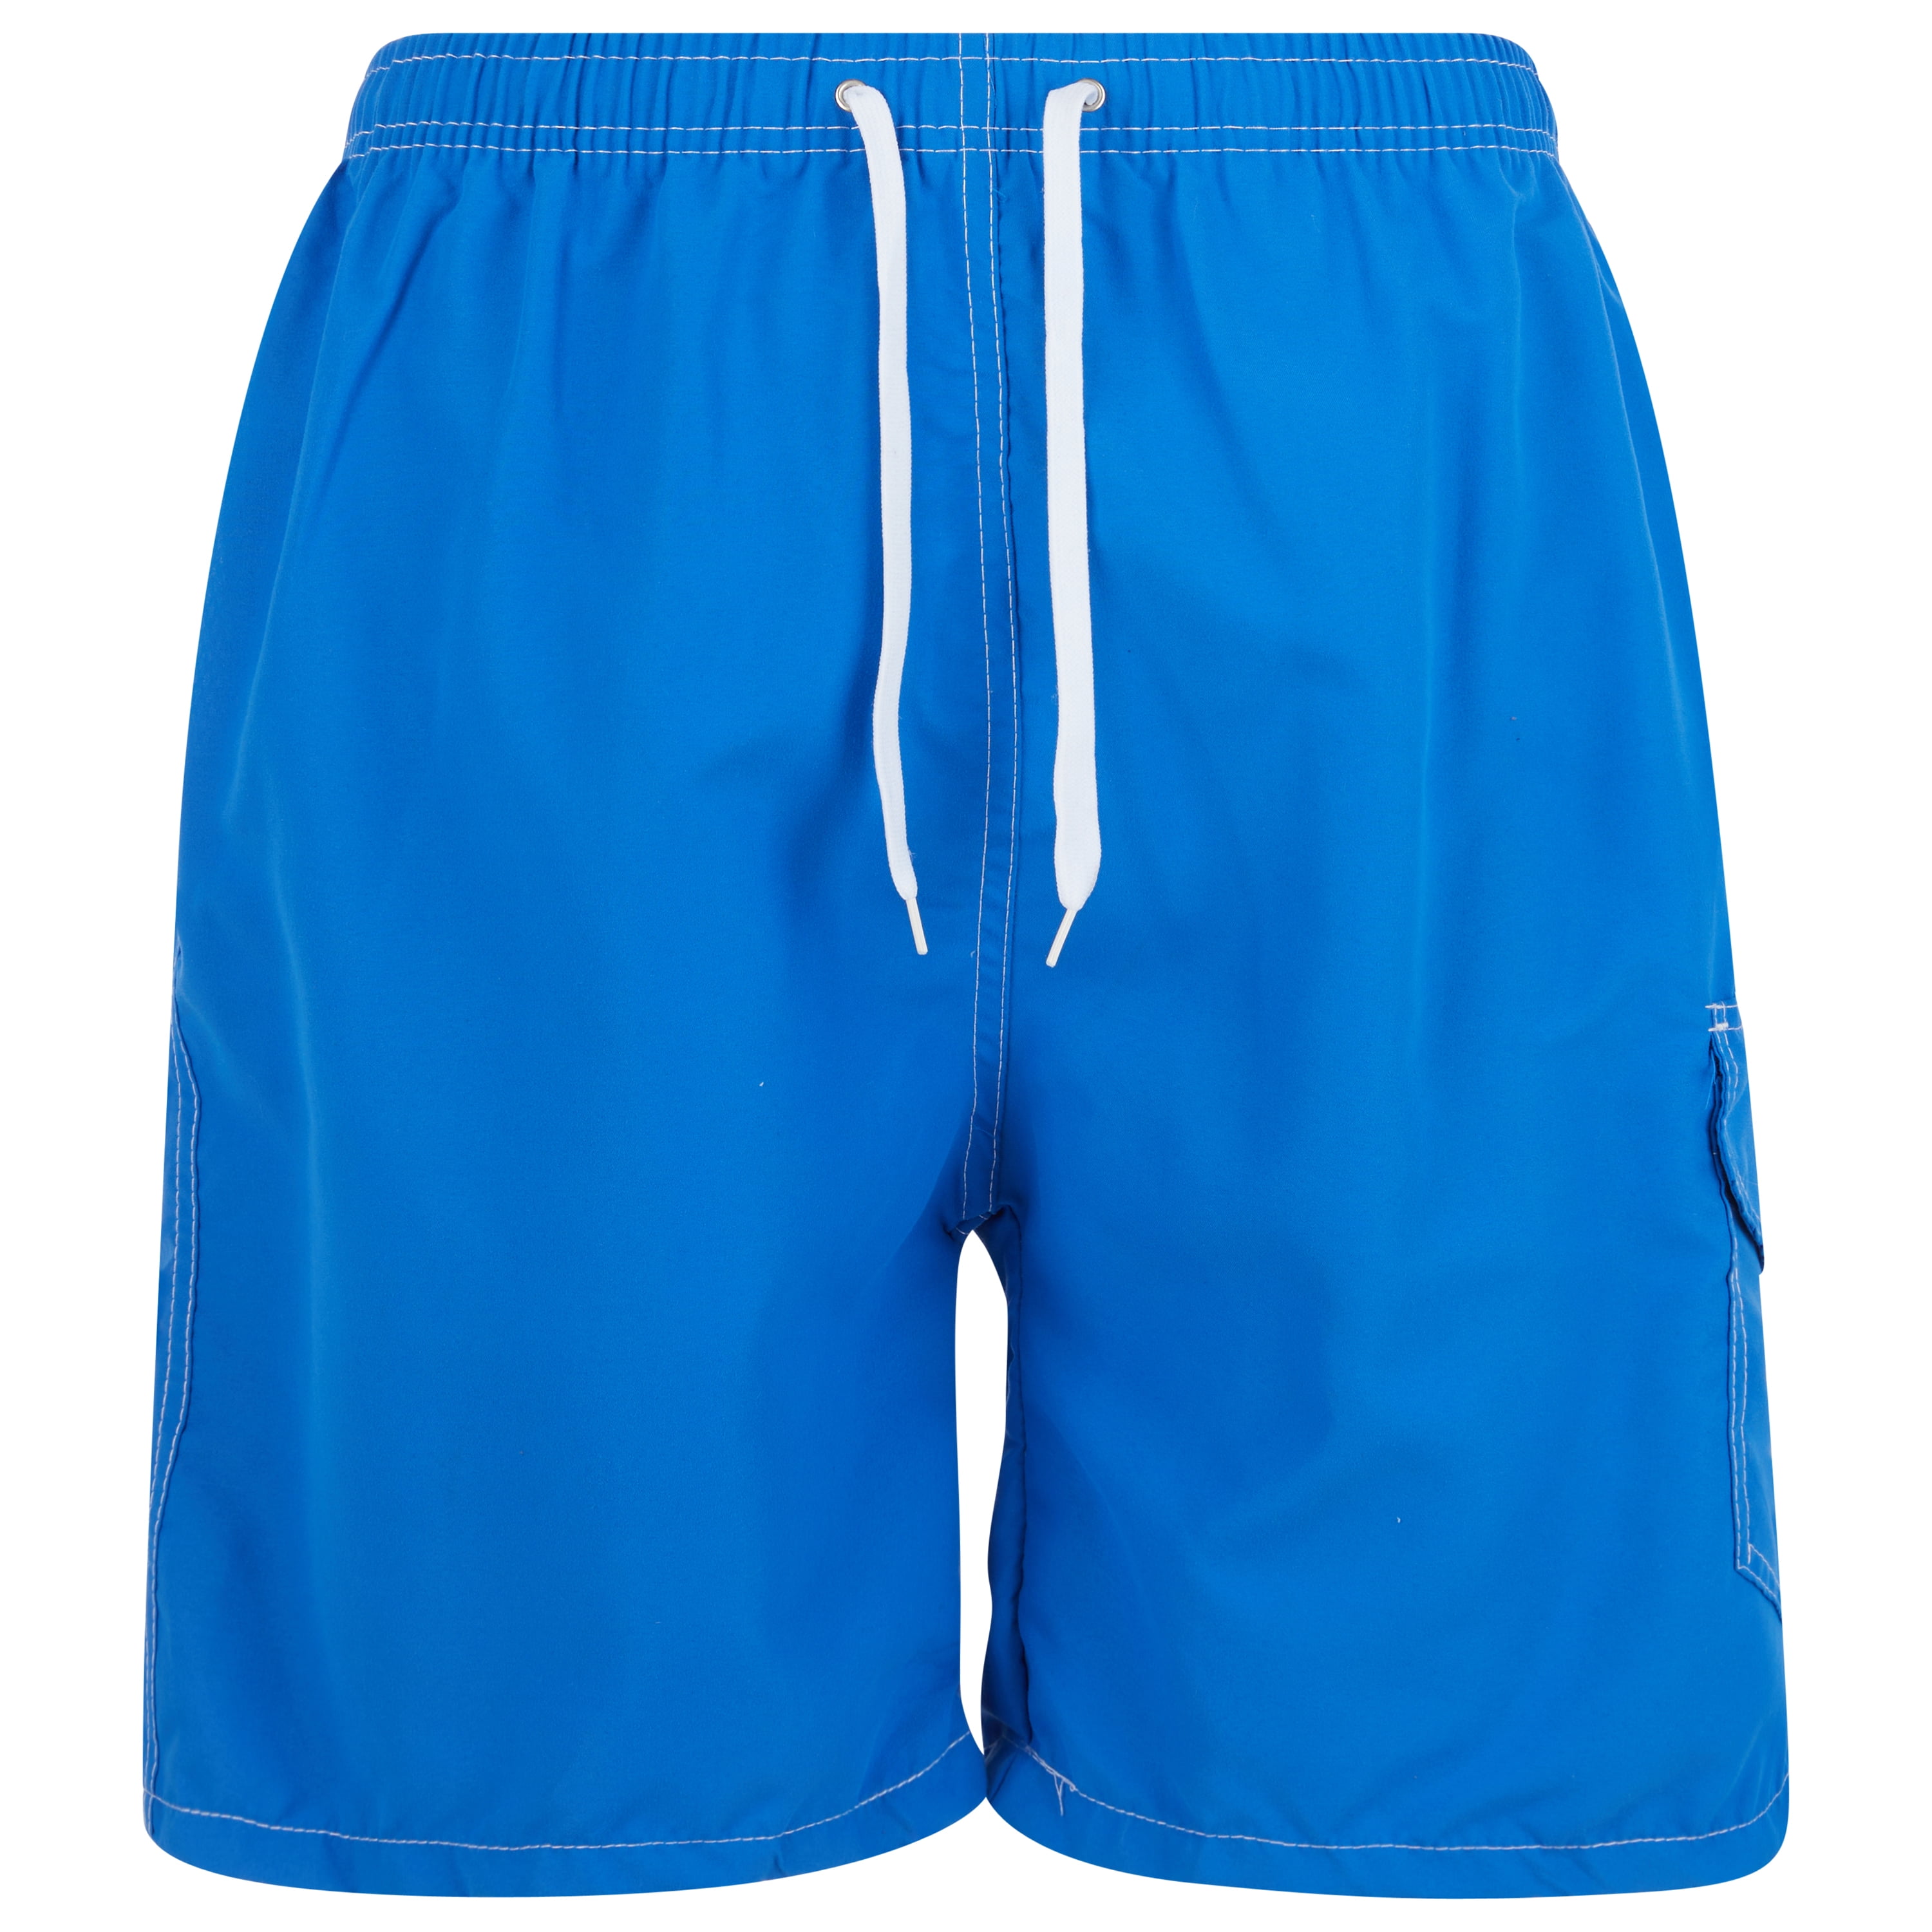 iBerryNY Mens Swim Trunks Adult Male Board Shorts Quick Dry, Cargo ...